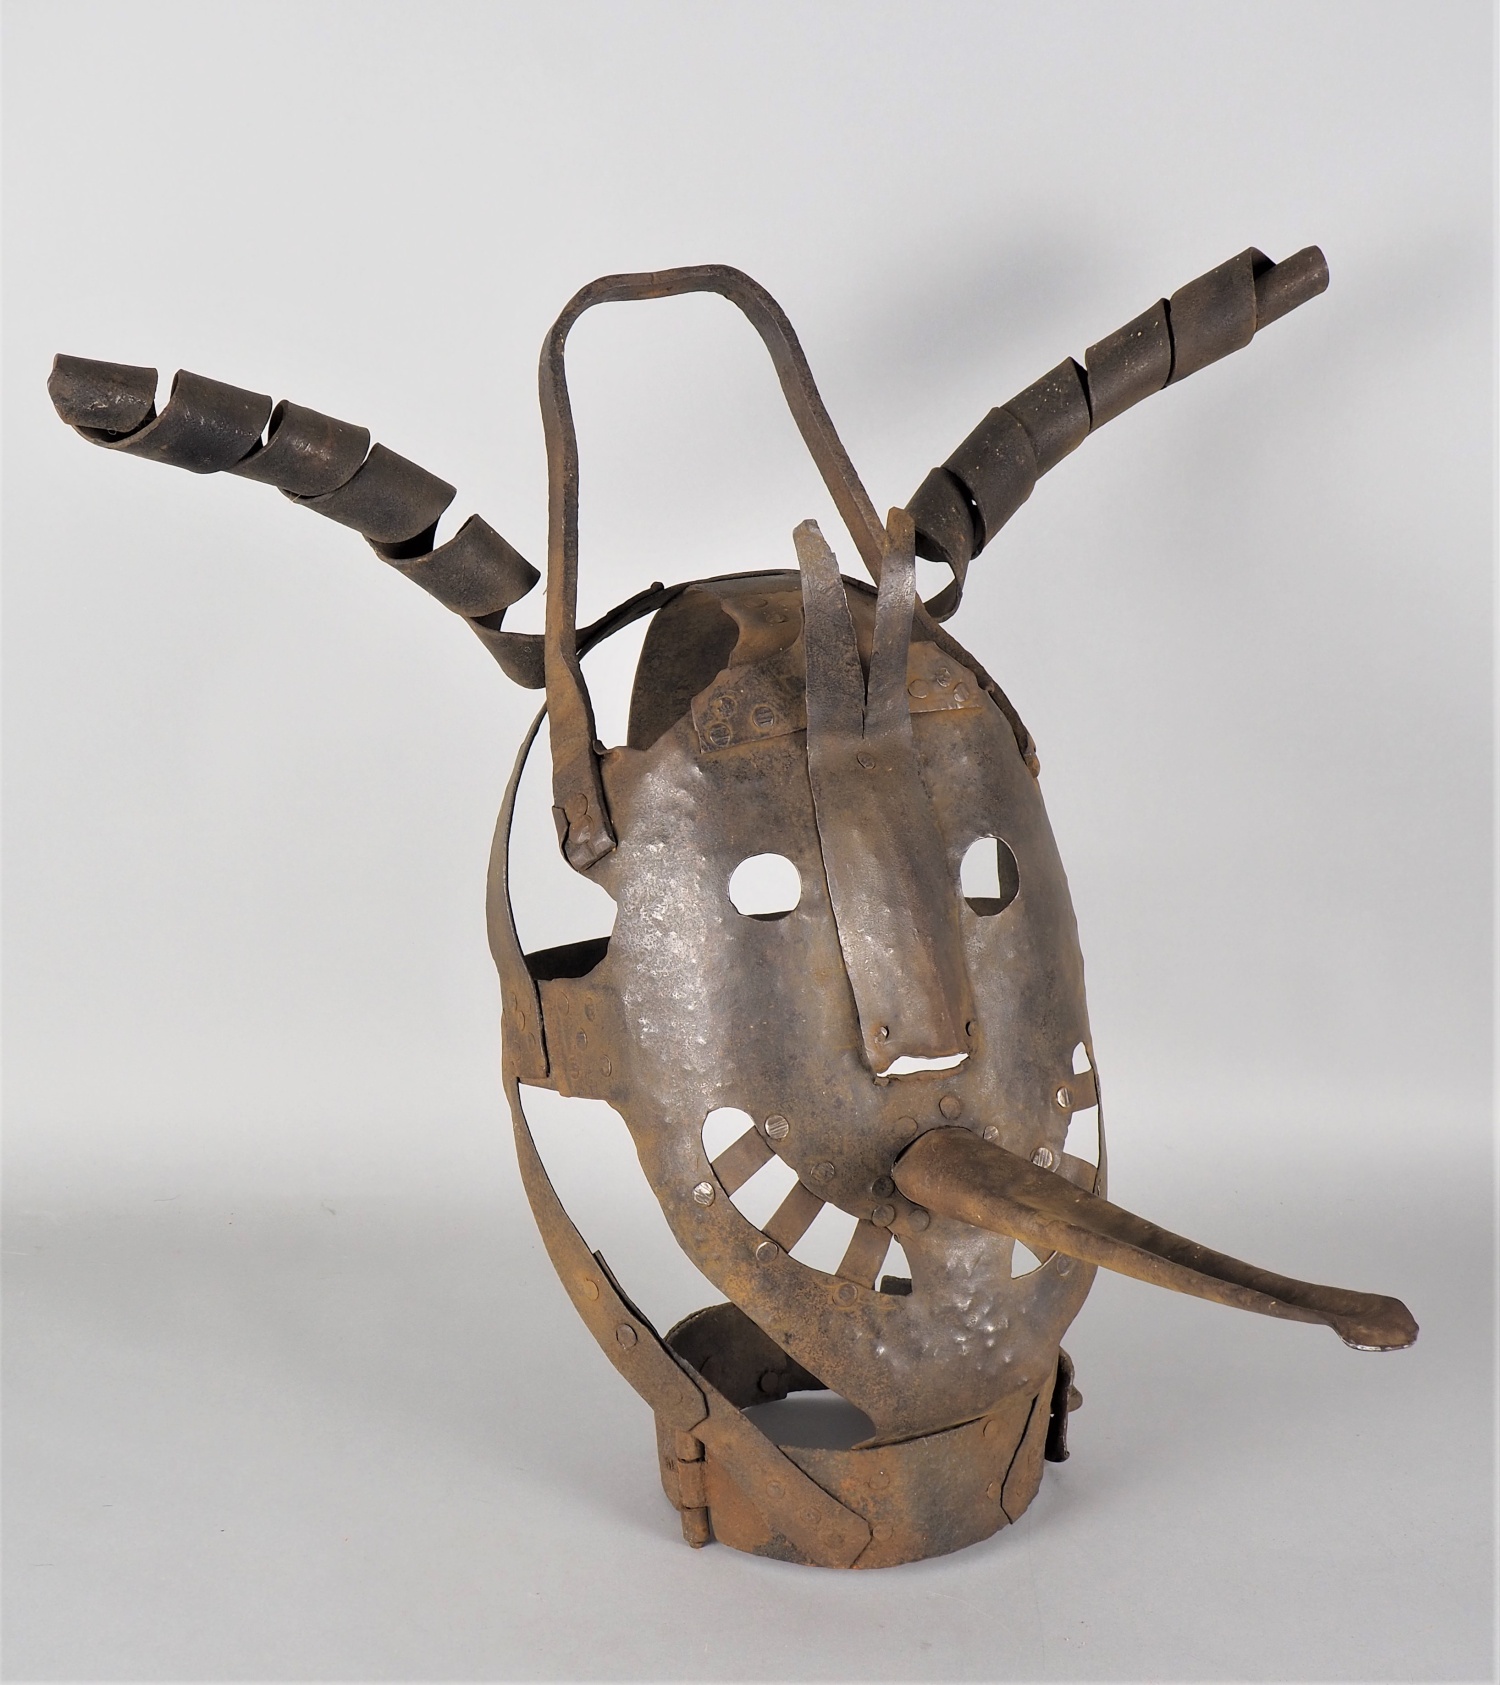 Antique shame mask in the style of the 17th century.